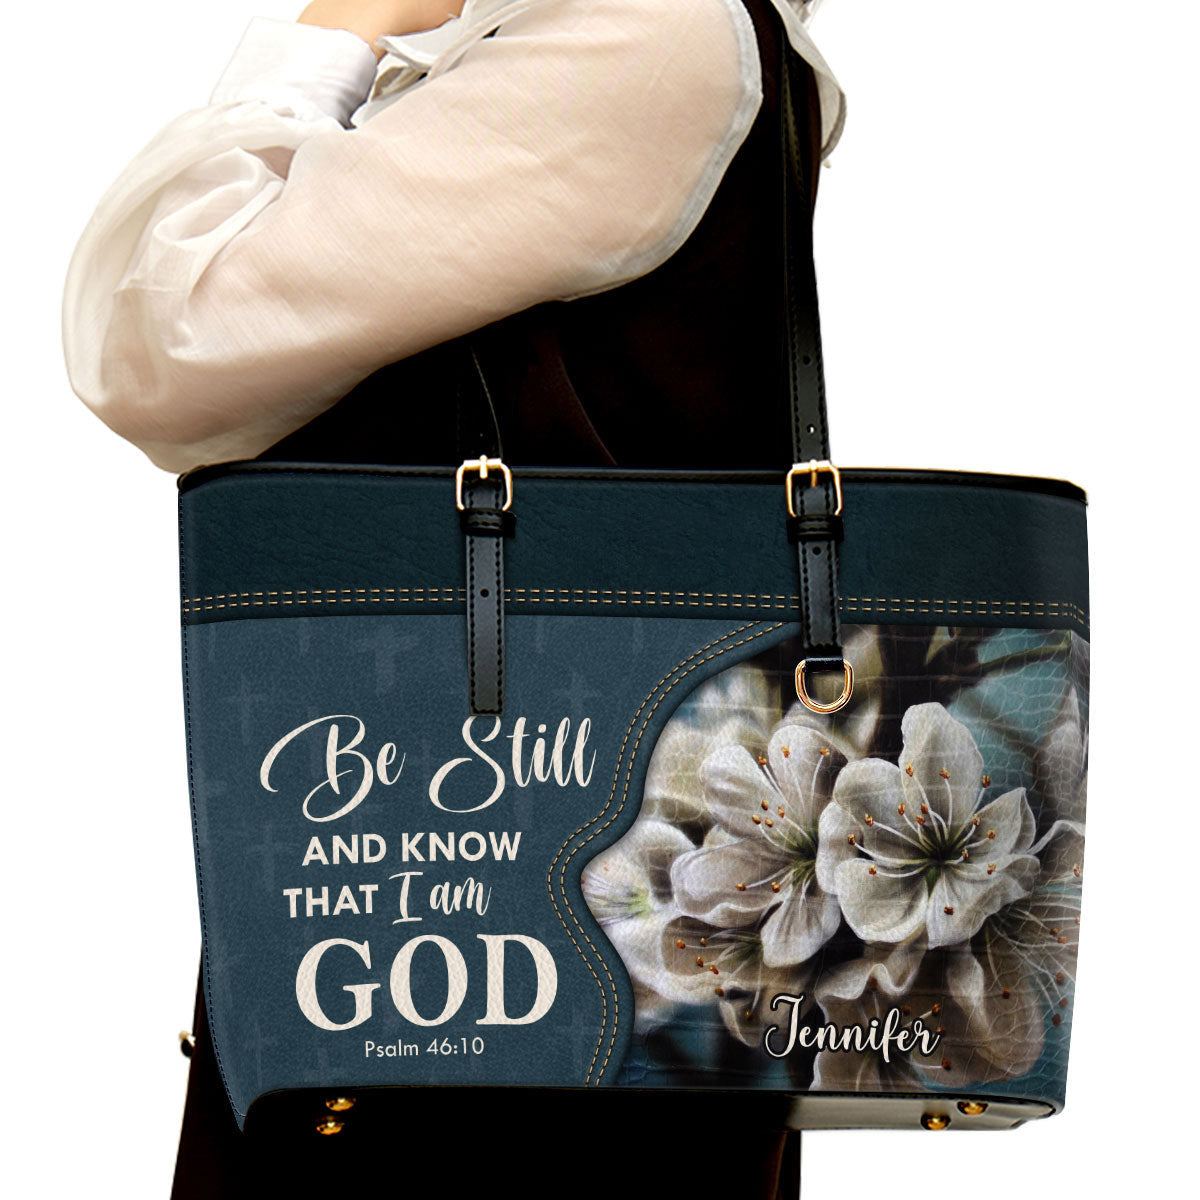 Be Still And Know That I Am God Personalized Pu Leather Tote Bag For Women - Mom Gifts For Mothers Day